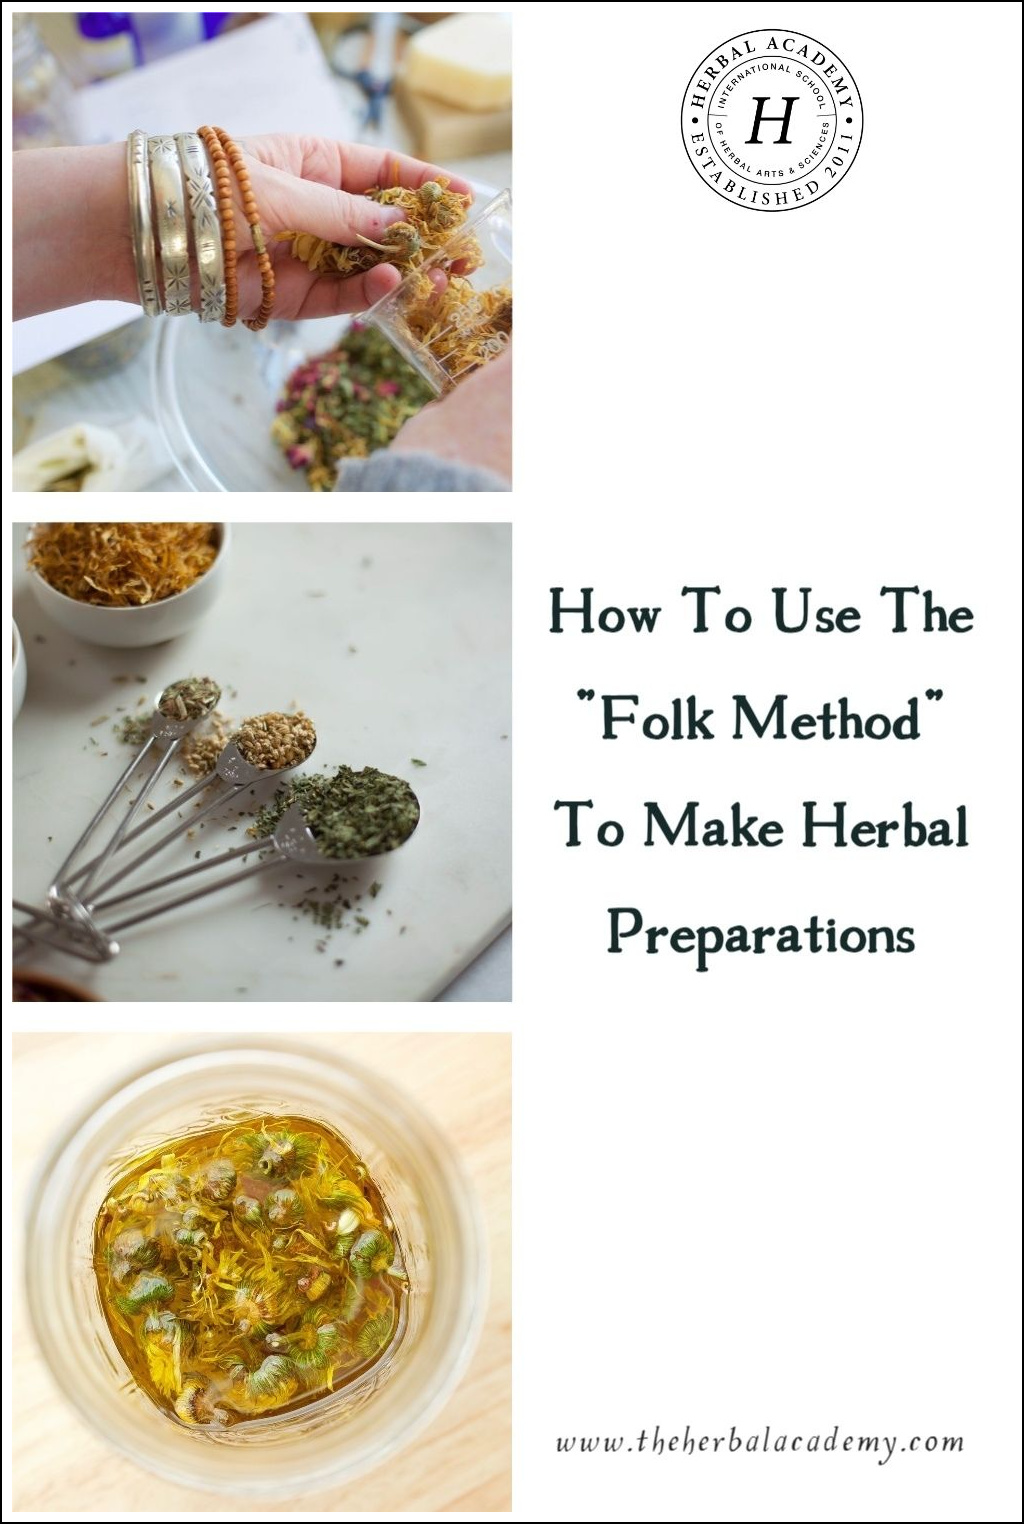 How To Use The "Folk Method" To Make Herbal Preparations | Herbal Academy | Learn what the folk method is, the differences between it and the ratio method, and how to make an herbal preparation this simple herbal technique.